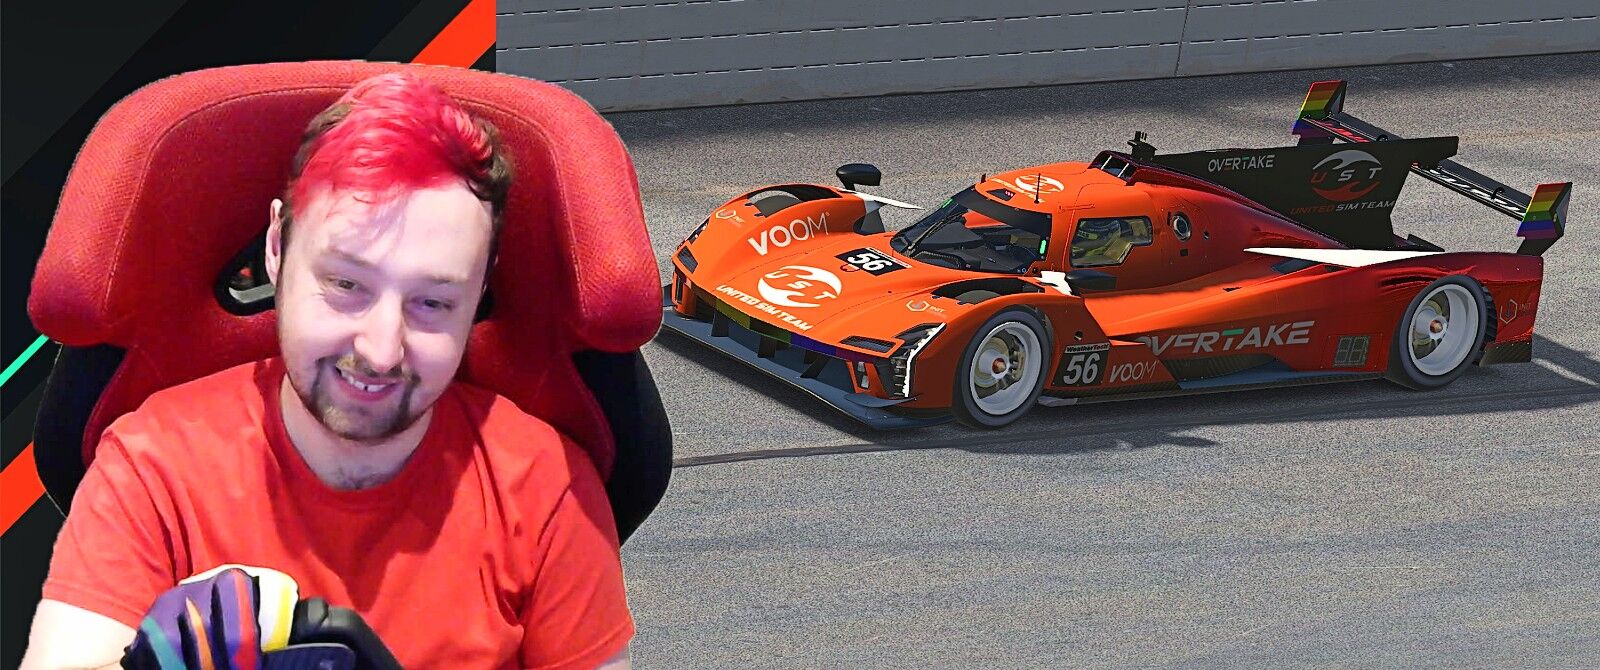 On the left is a man with bright red hair in a red shirt, with a prototype racing car on the right.